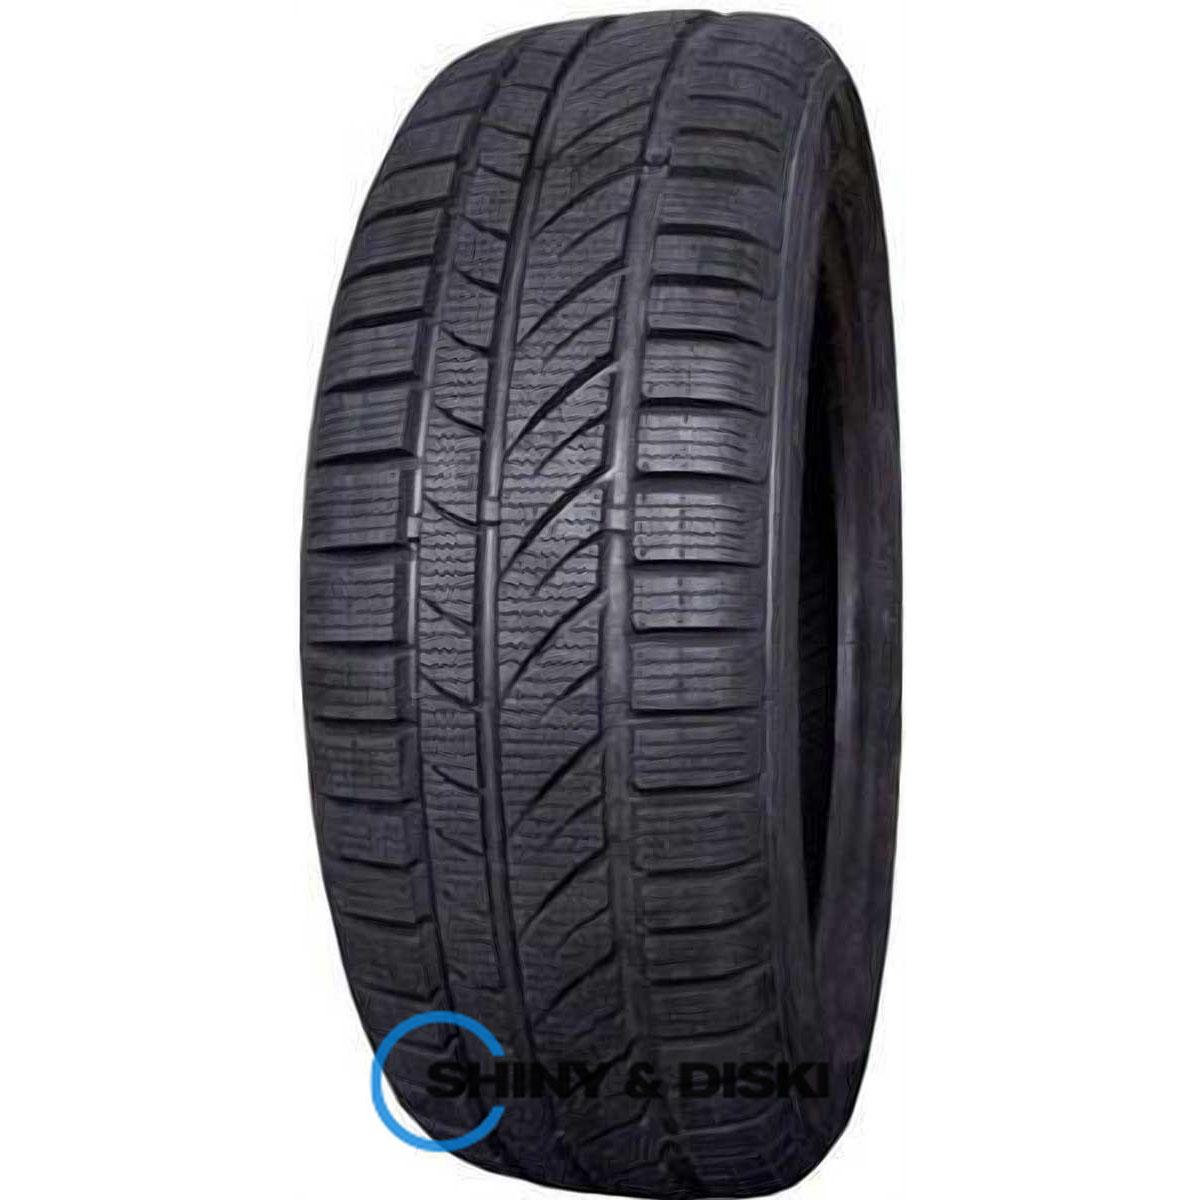 infinity inf-049 155/70 r13 75t